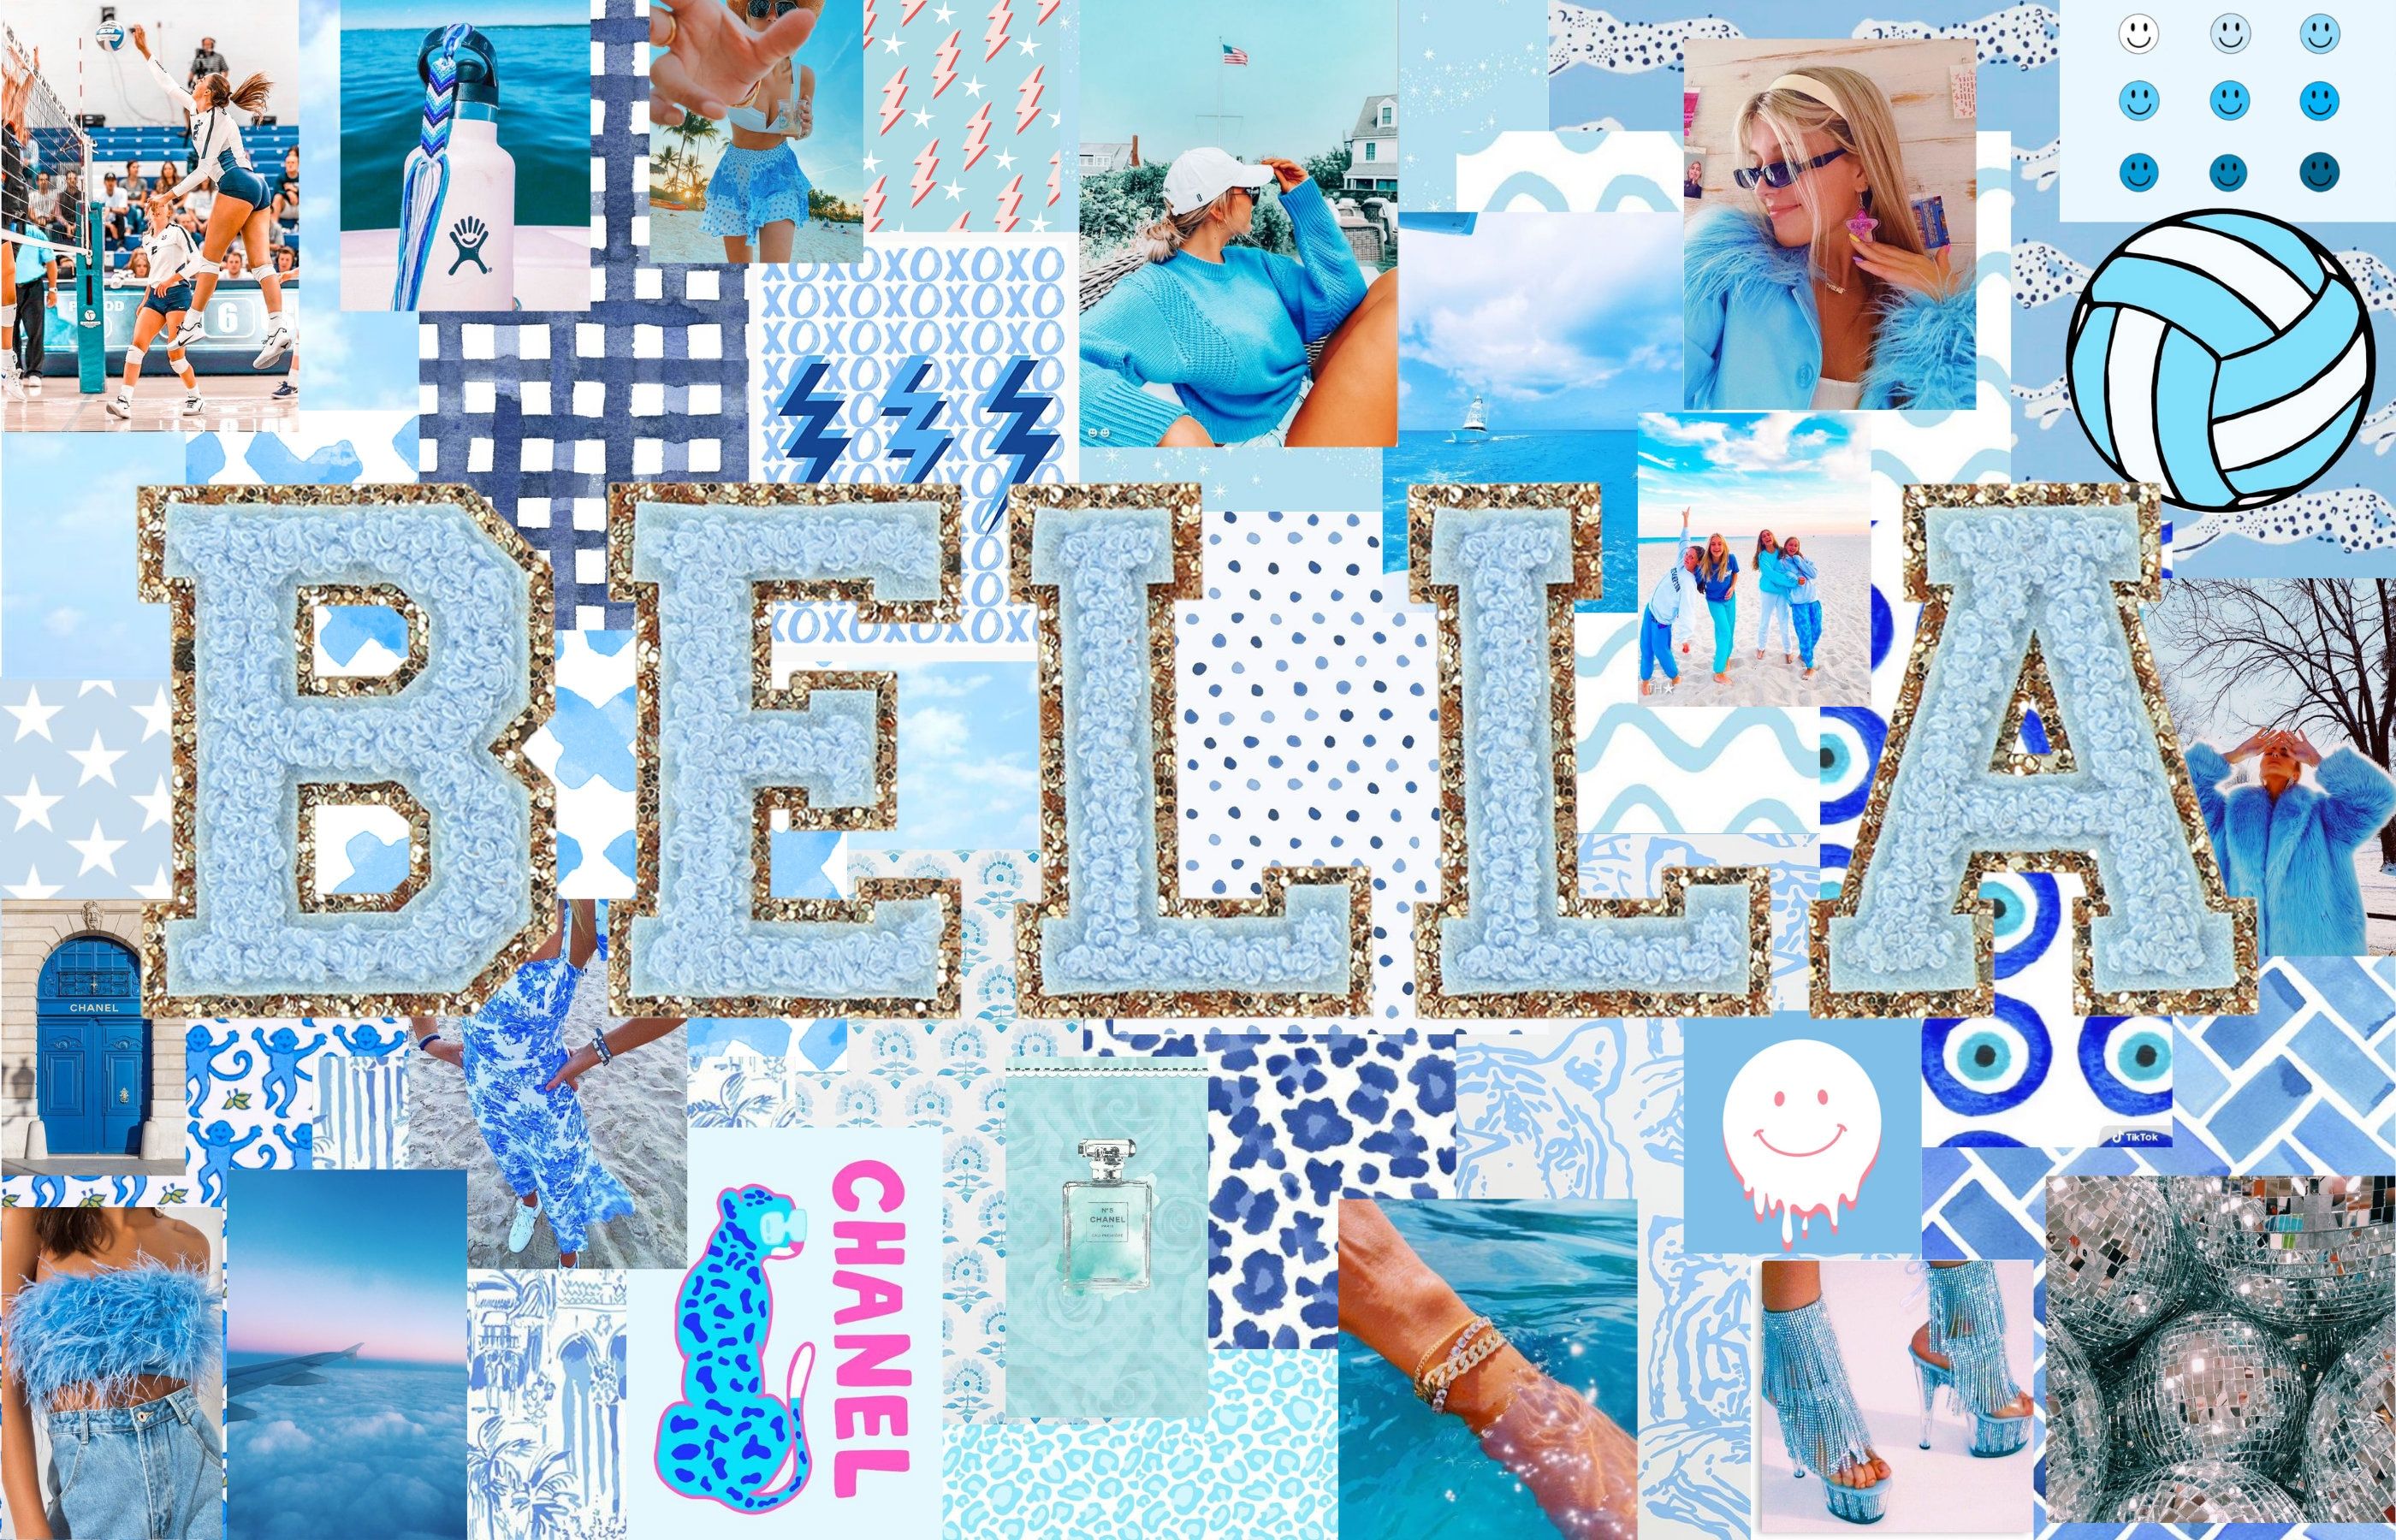 Download Vibrant Pink And Blue Preppy PFP Collage Wallpaper